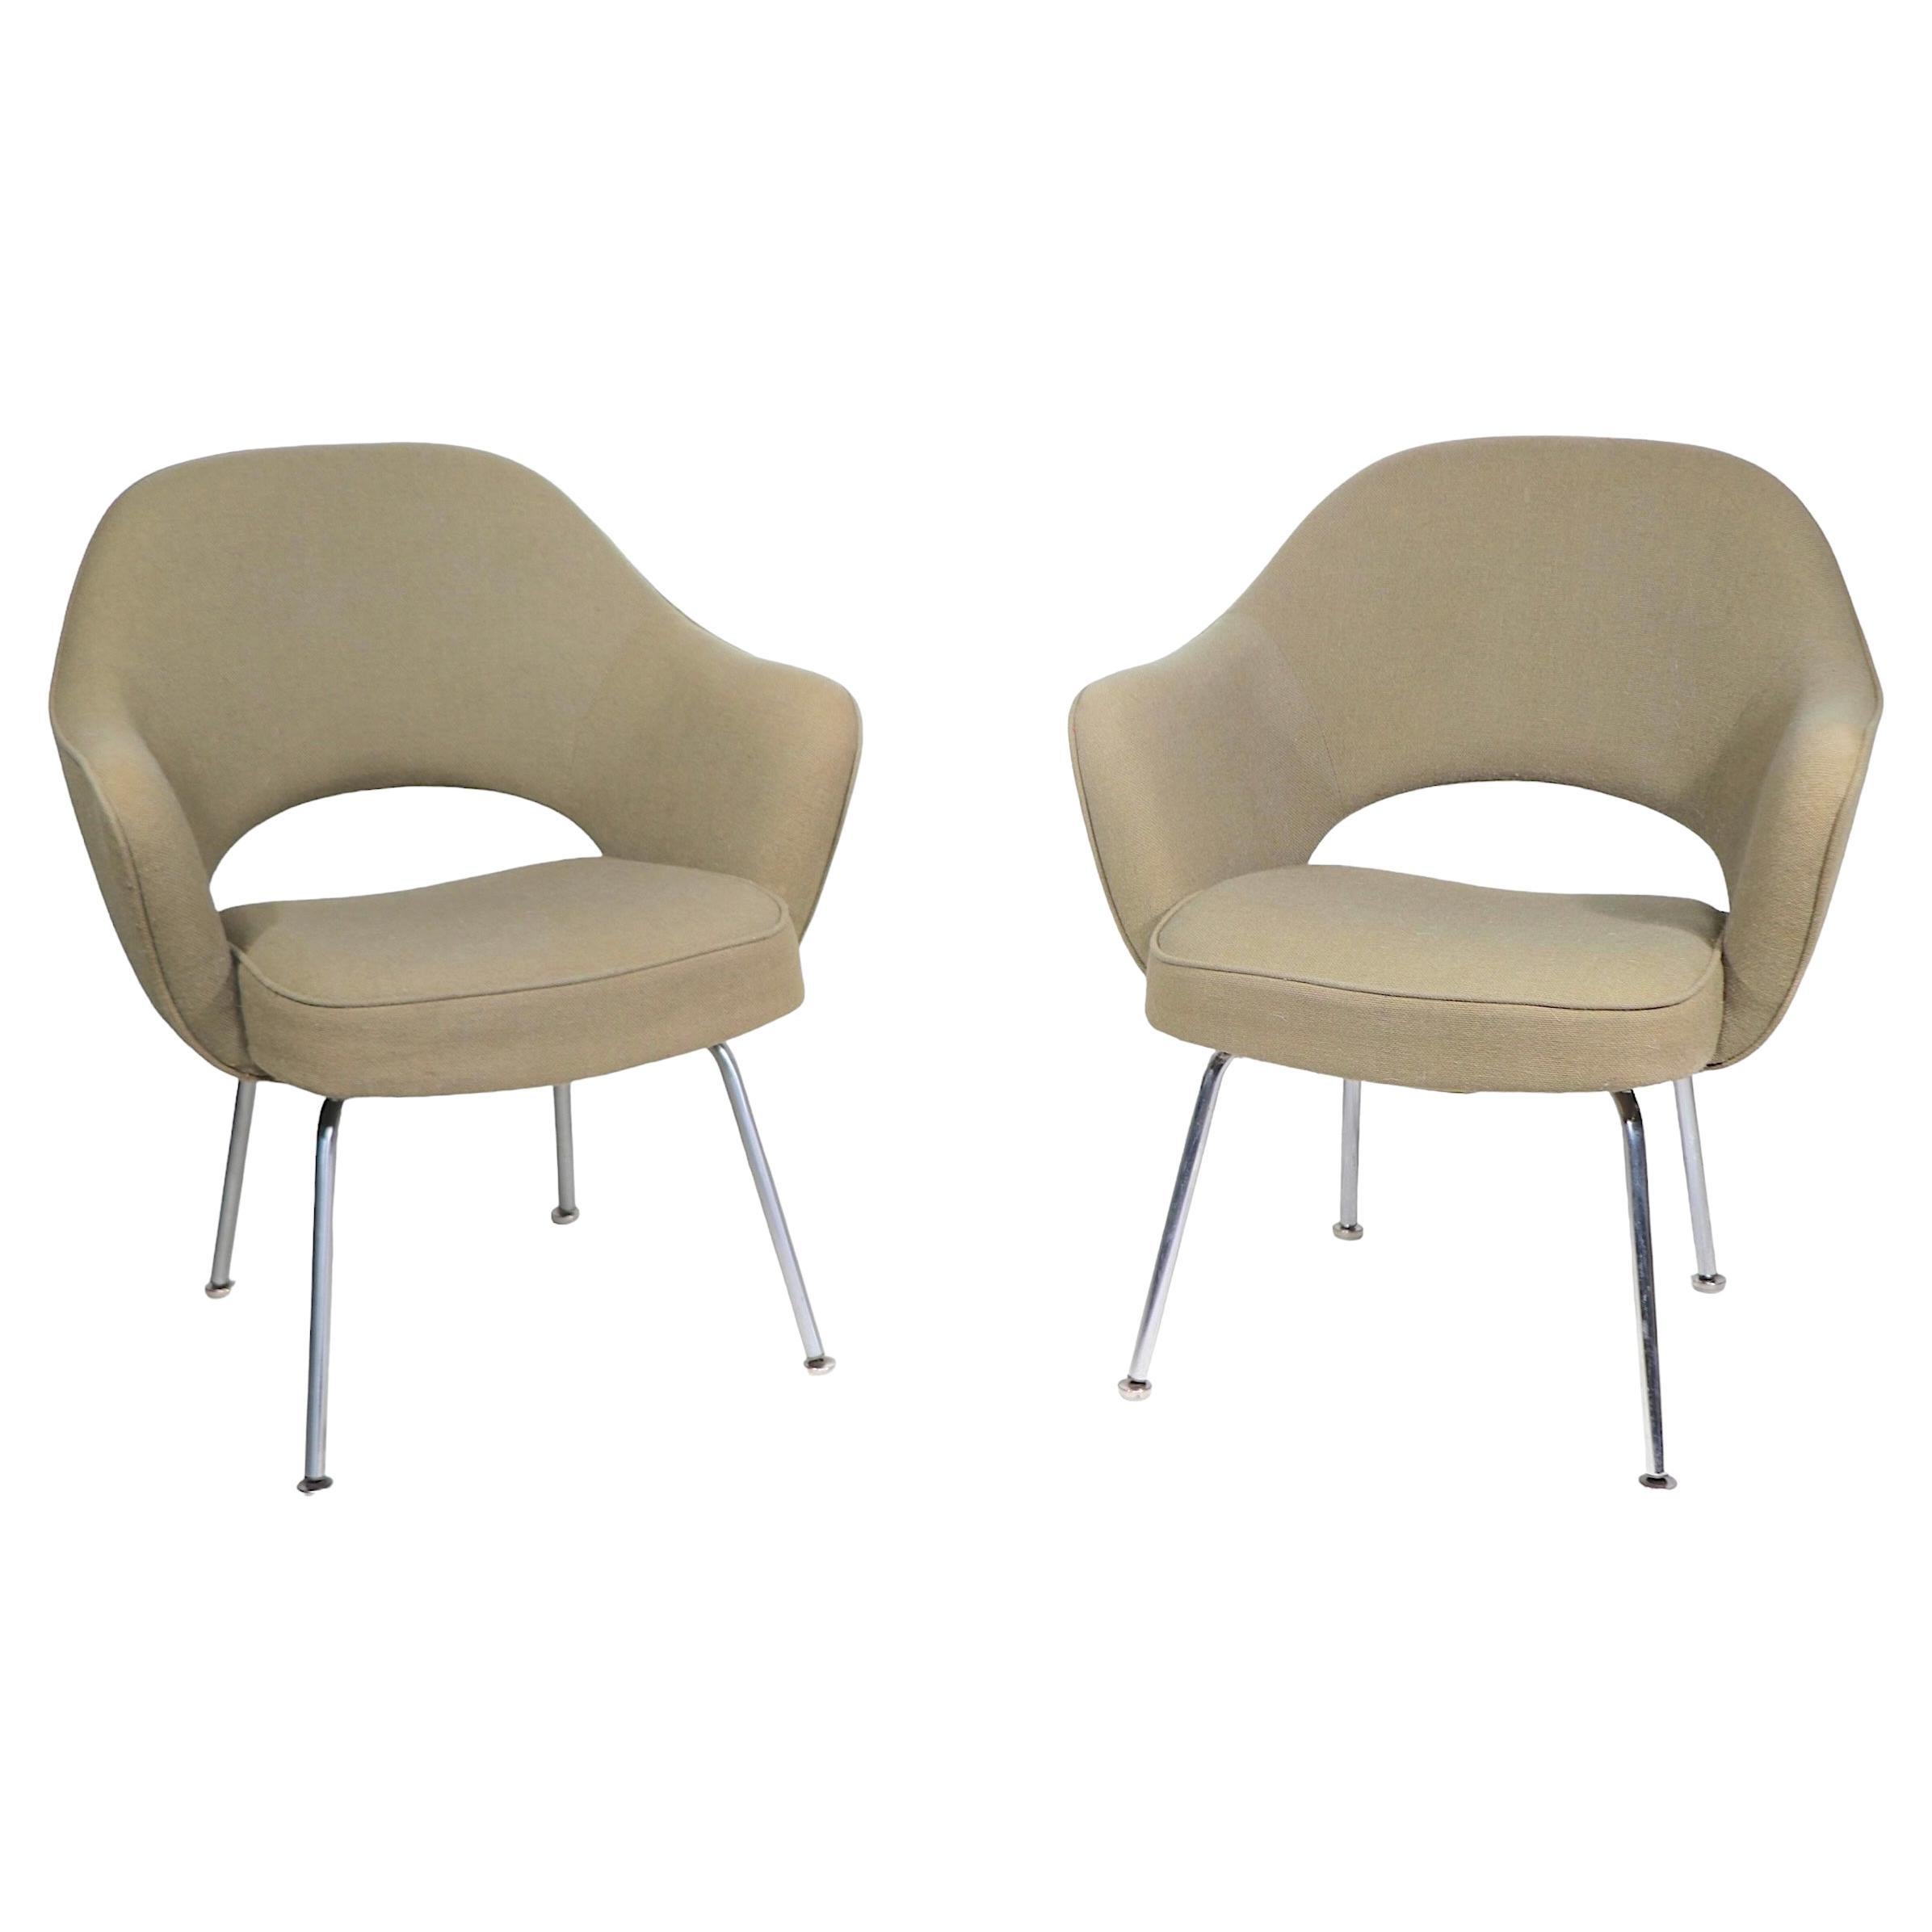 Pr. Vintage Saarinen for Knoll Executive Chairs c. 1960/70's For Sale